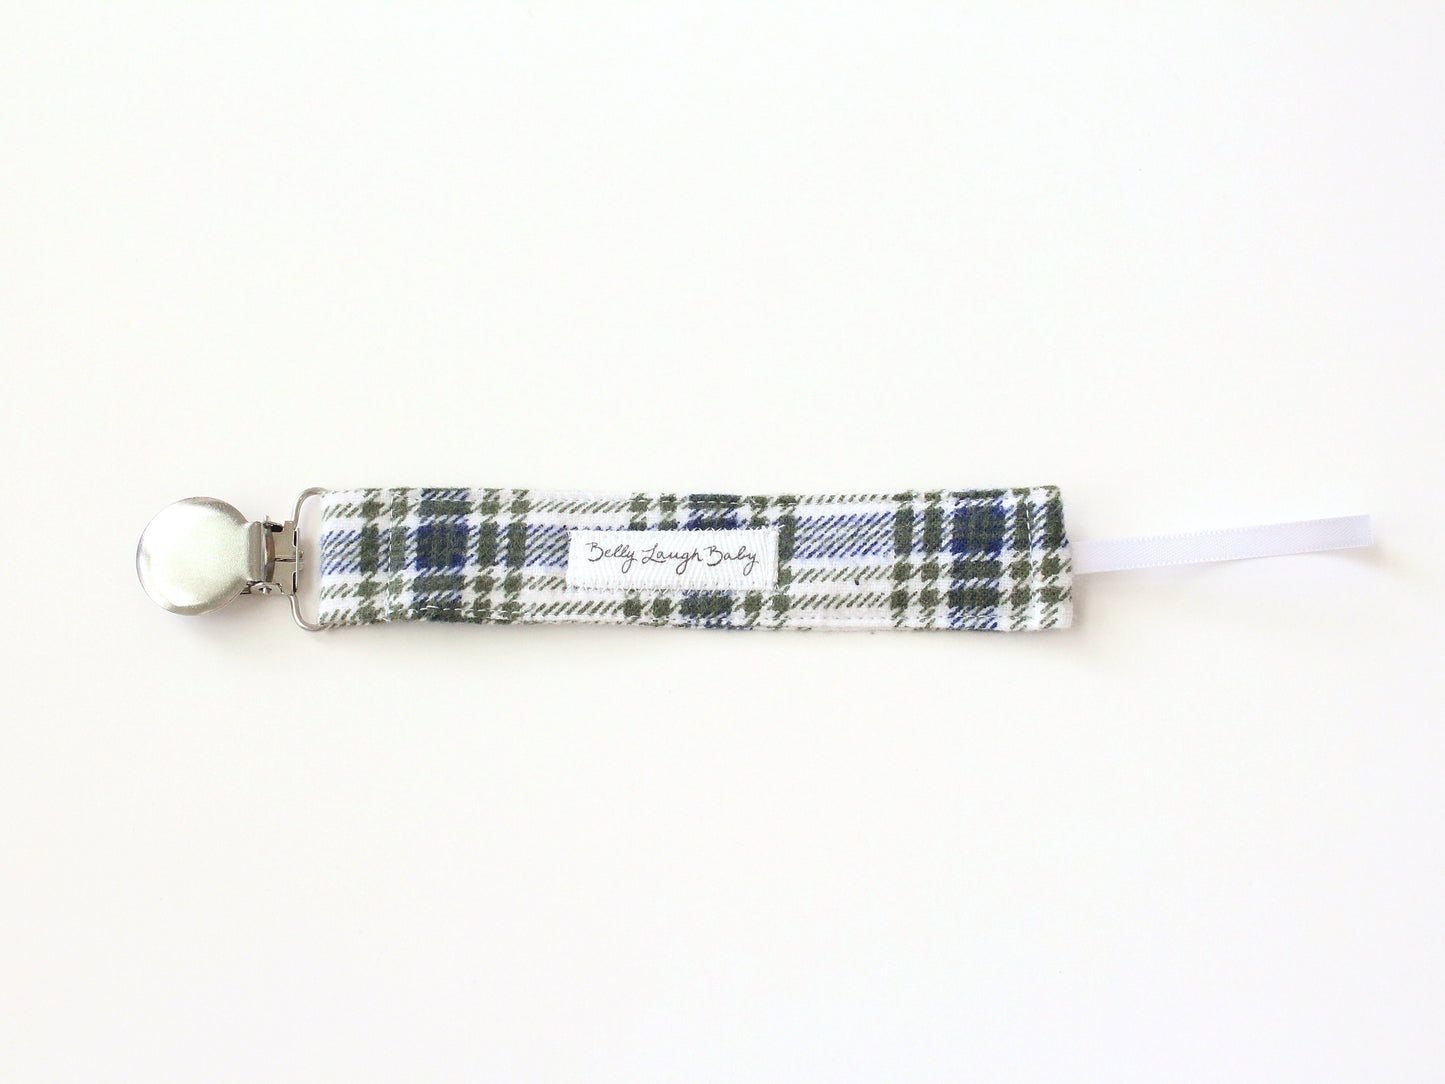 Blue and Green Plaid Fabric Pacifier Clip | Gender Neutral Baby Gift | Soother Leash Binky Holder | CPSC Compliant